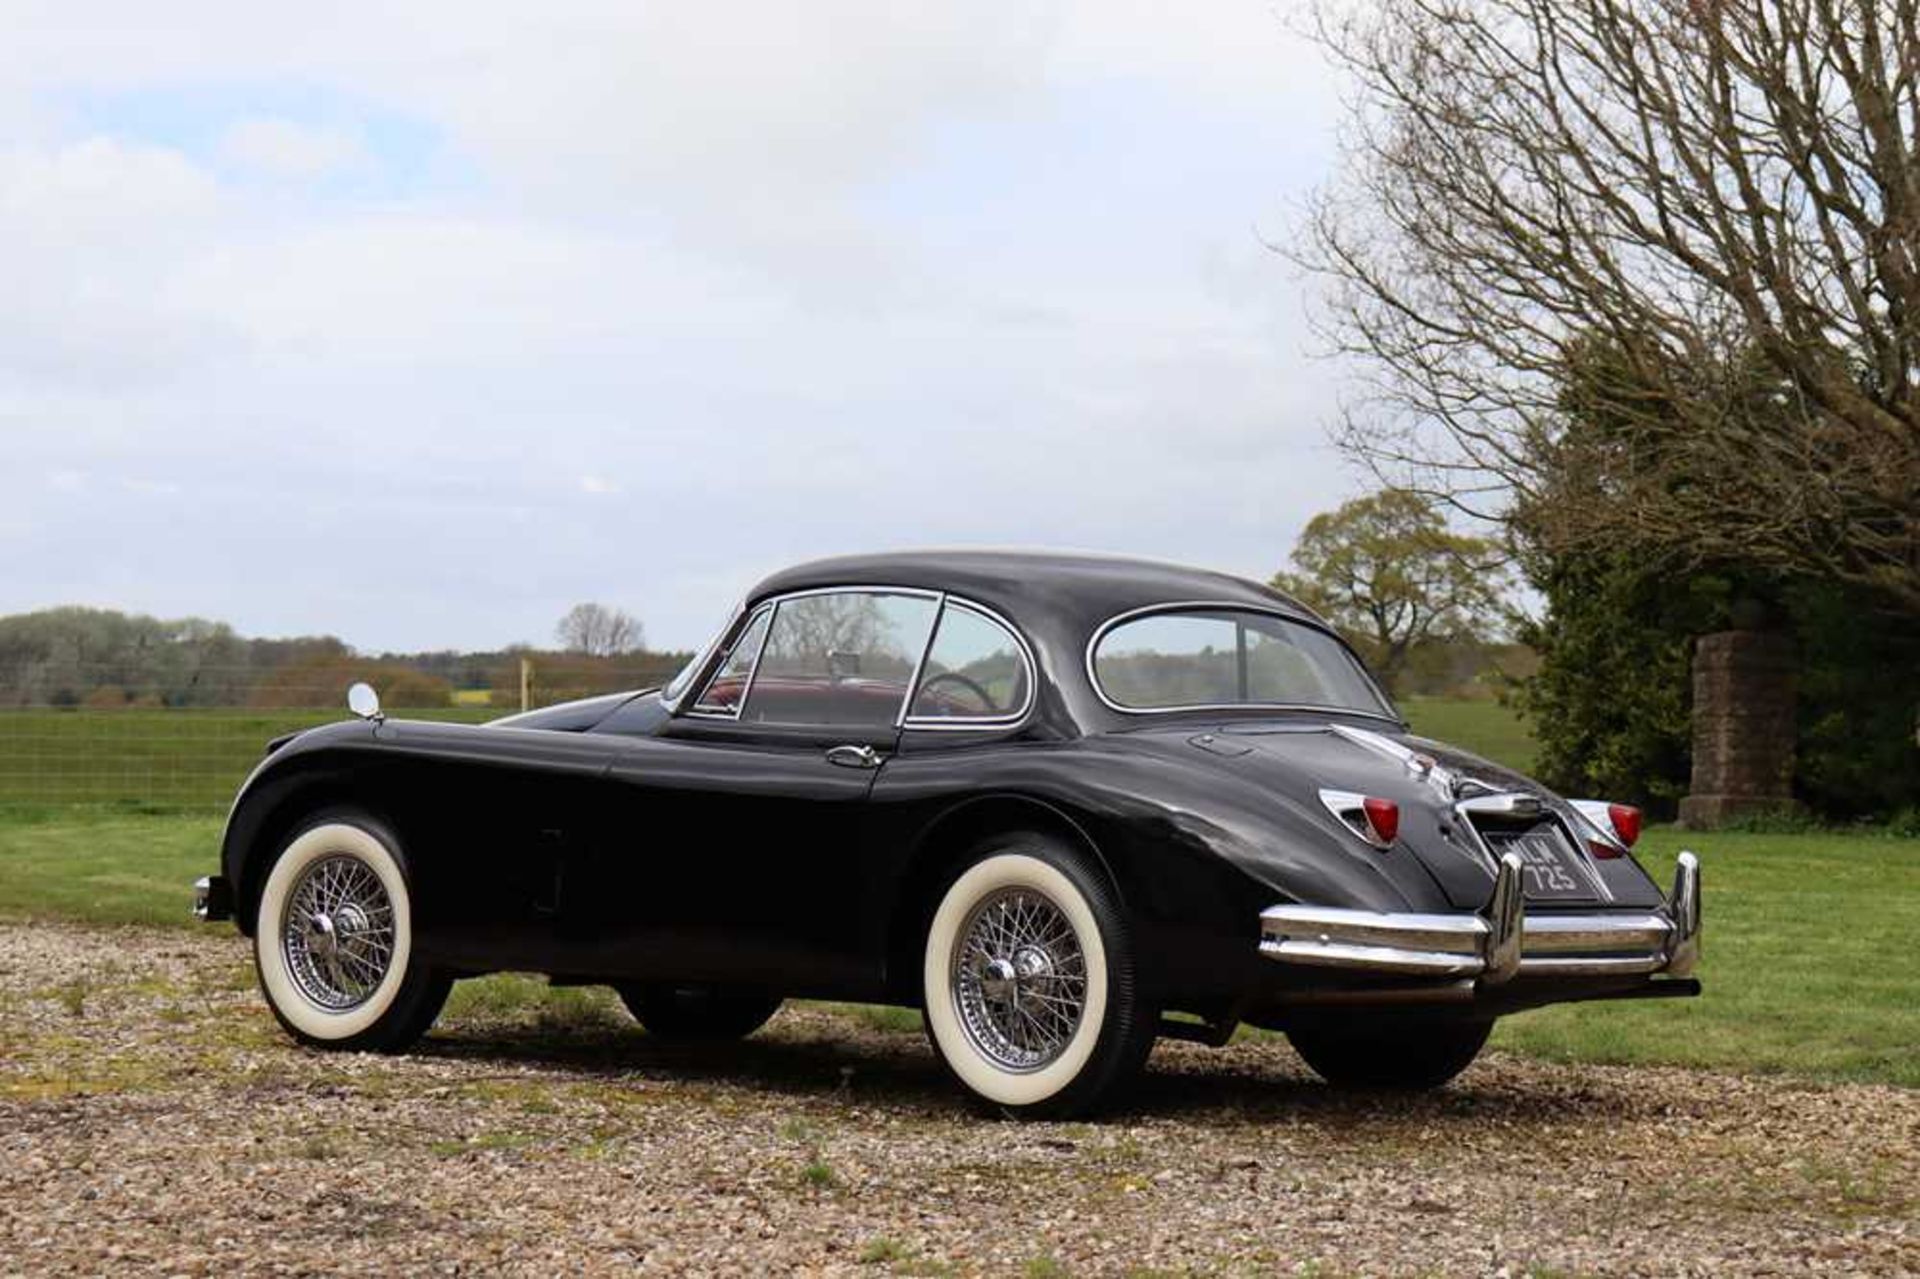 1959 Jaguar XK 150 Fixed Head Coupe 1 of just 1,368 RHD examples made - Image 13 of 49